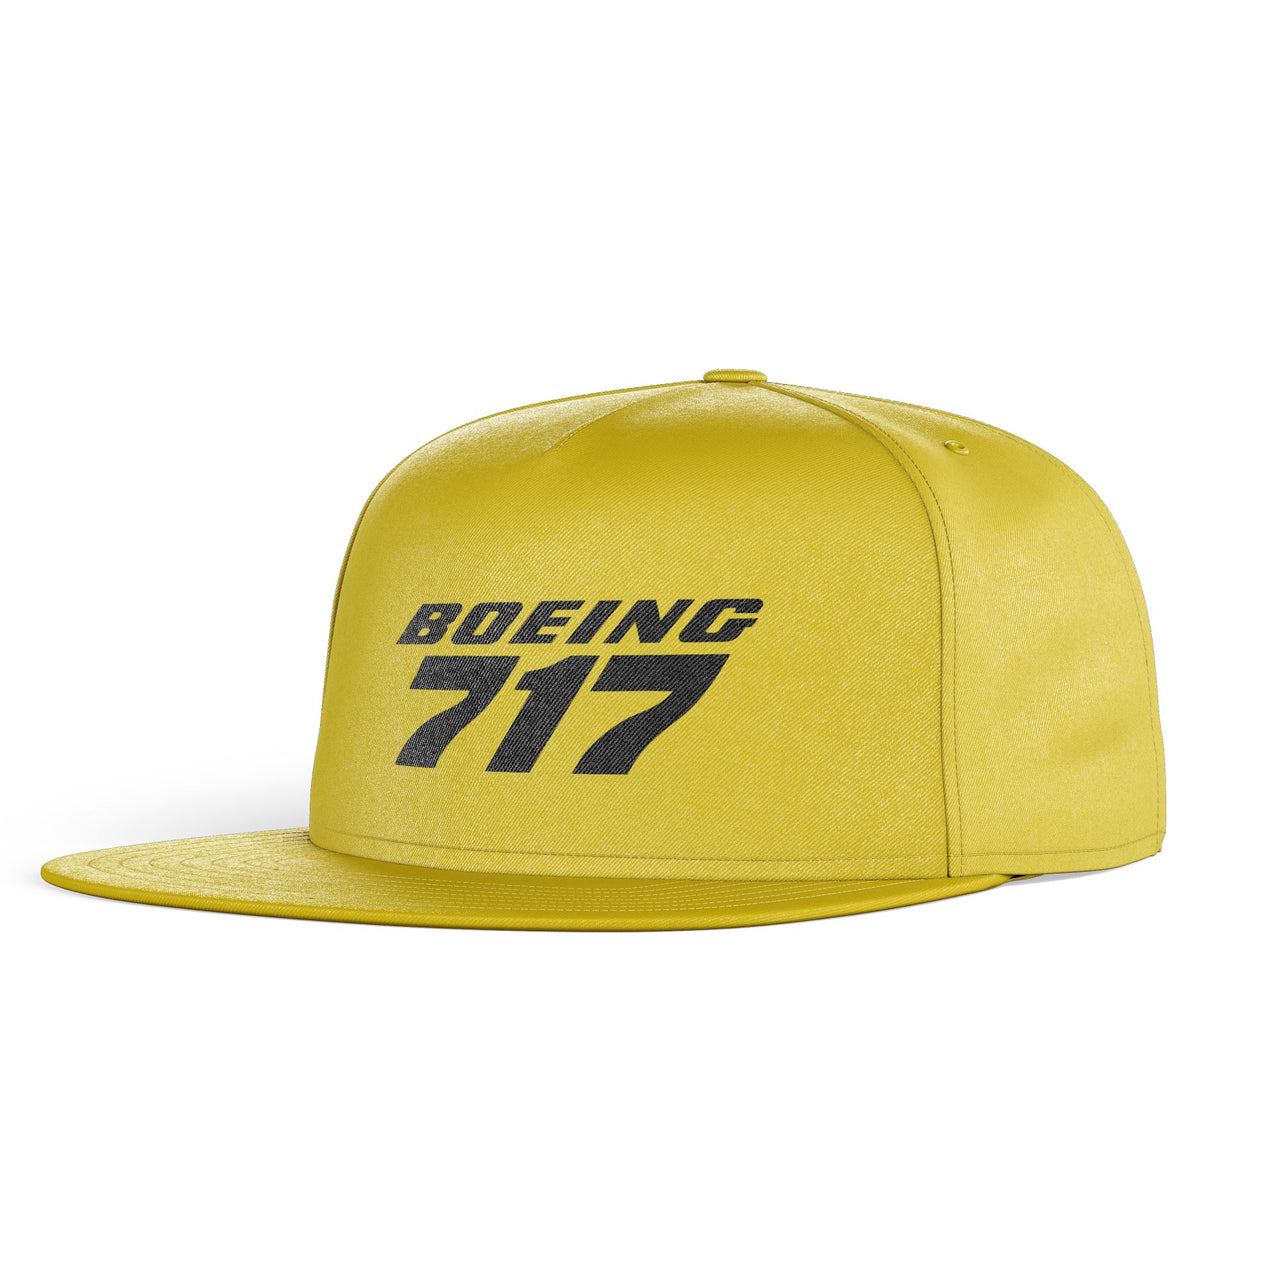 Boeing 717 & Text Designed Snapback Caps & Hats